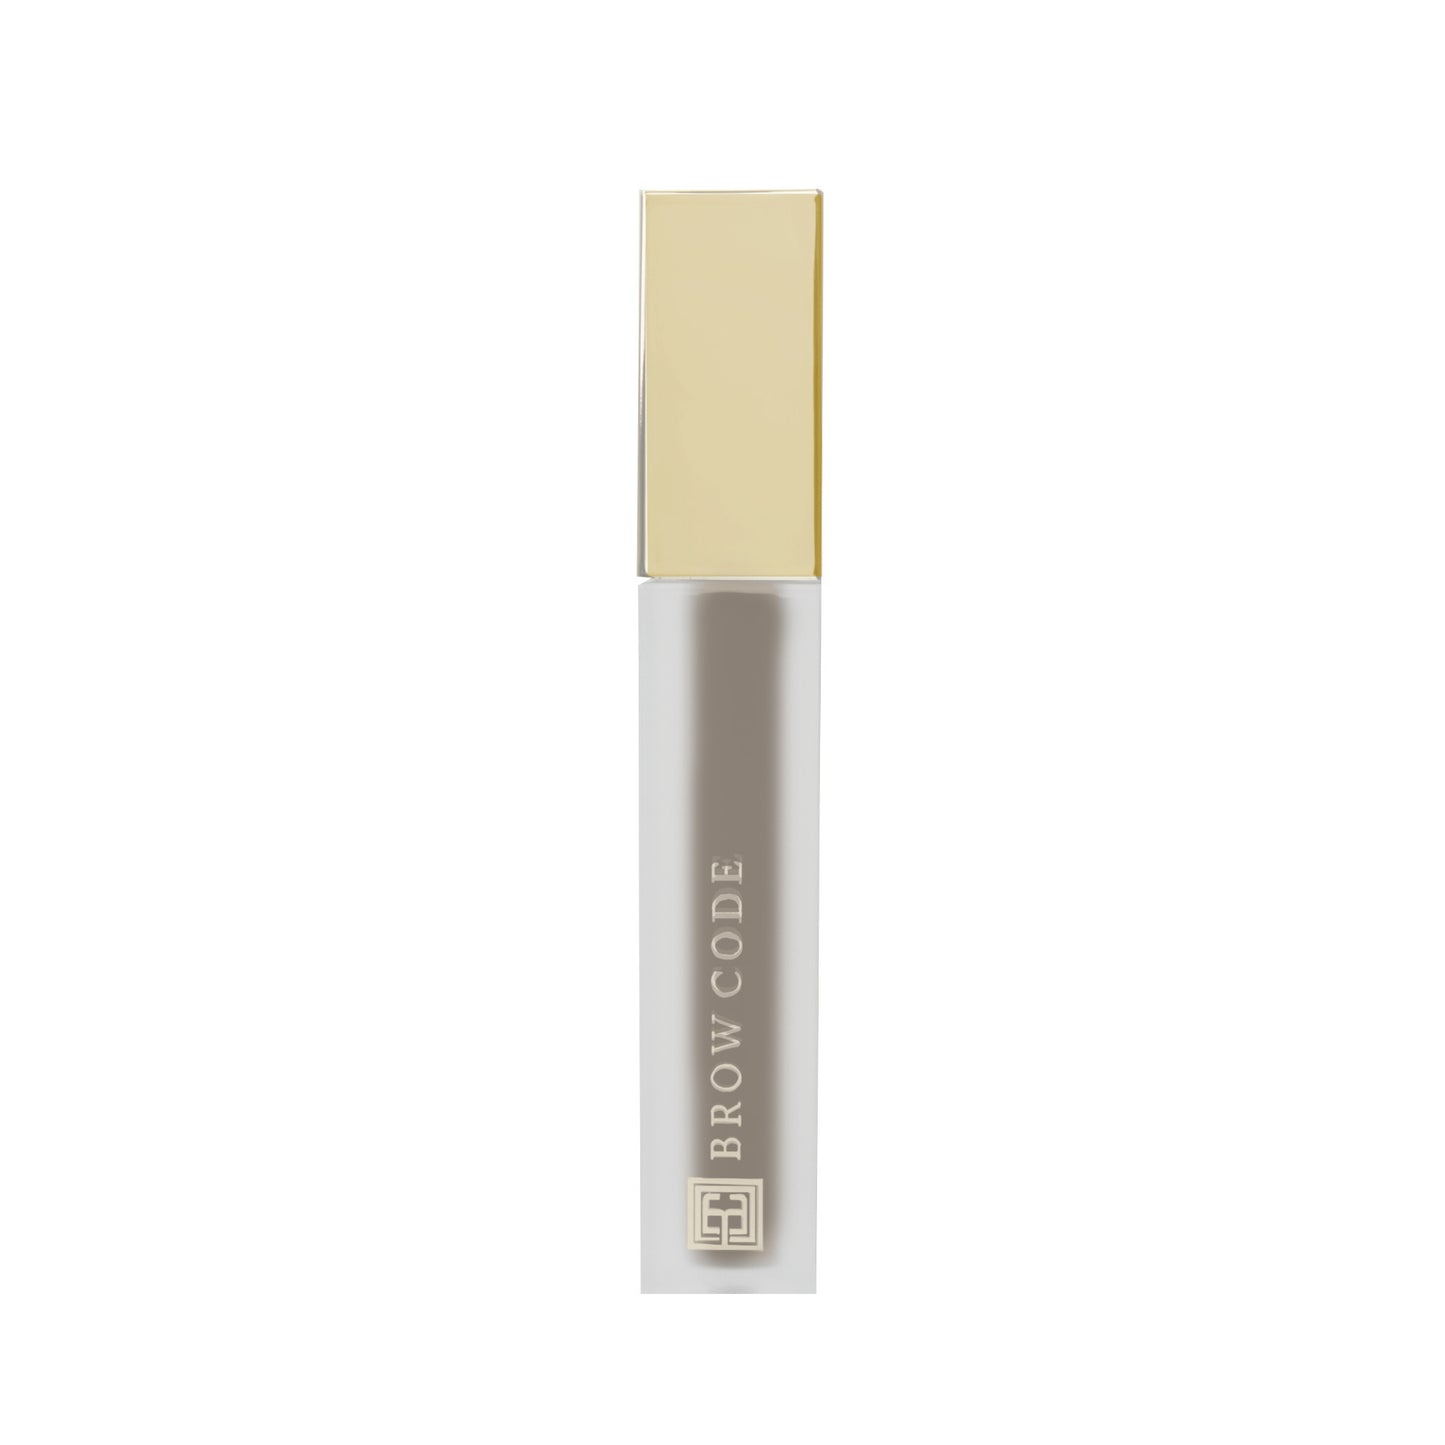 Tinted Multi-Peptide Brow Gel - Color-Soft Brown - product against a white background